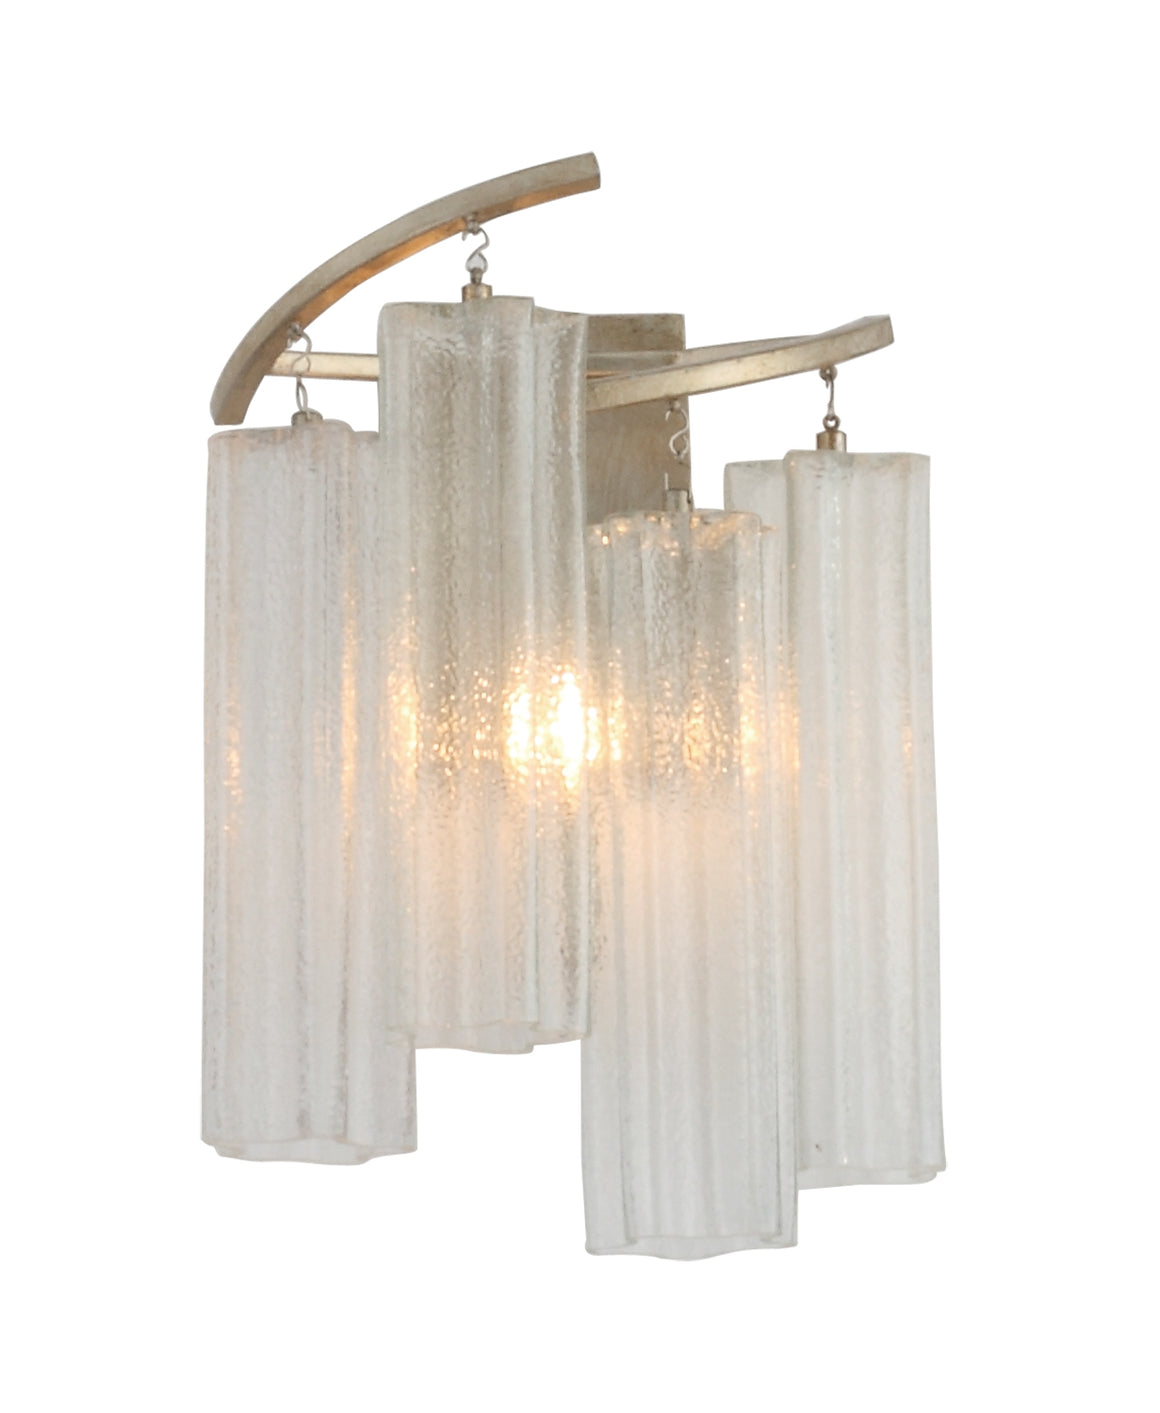 Victoria 1-Light Wall Sconce